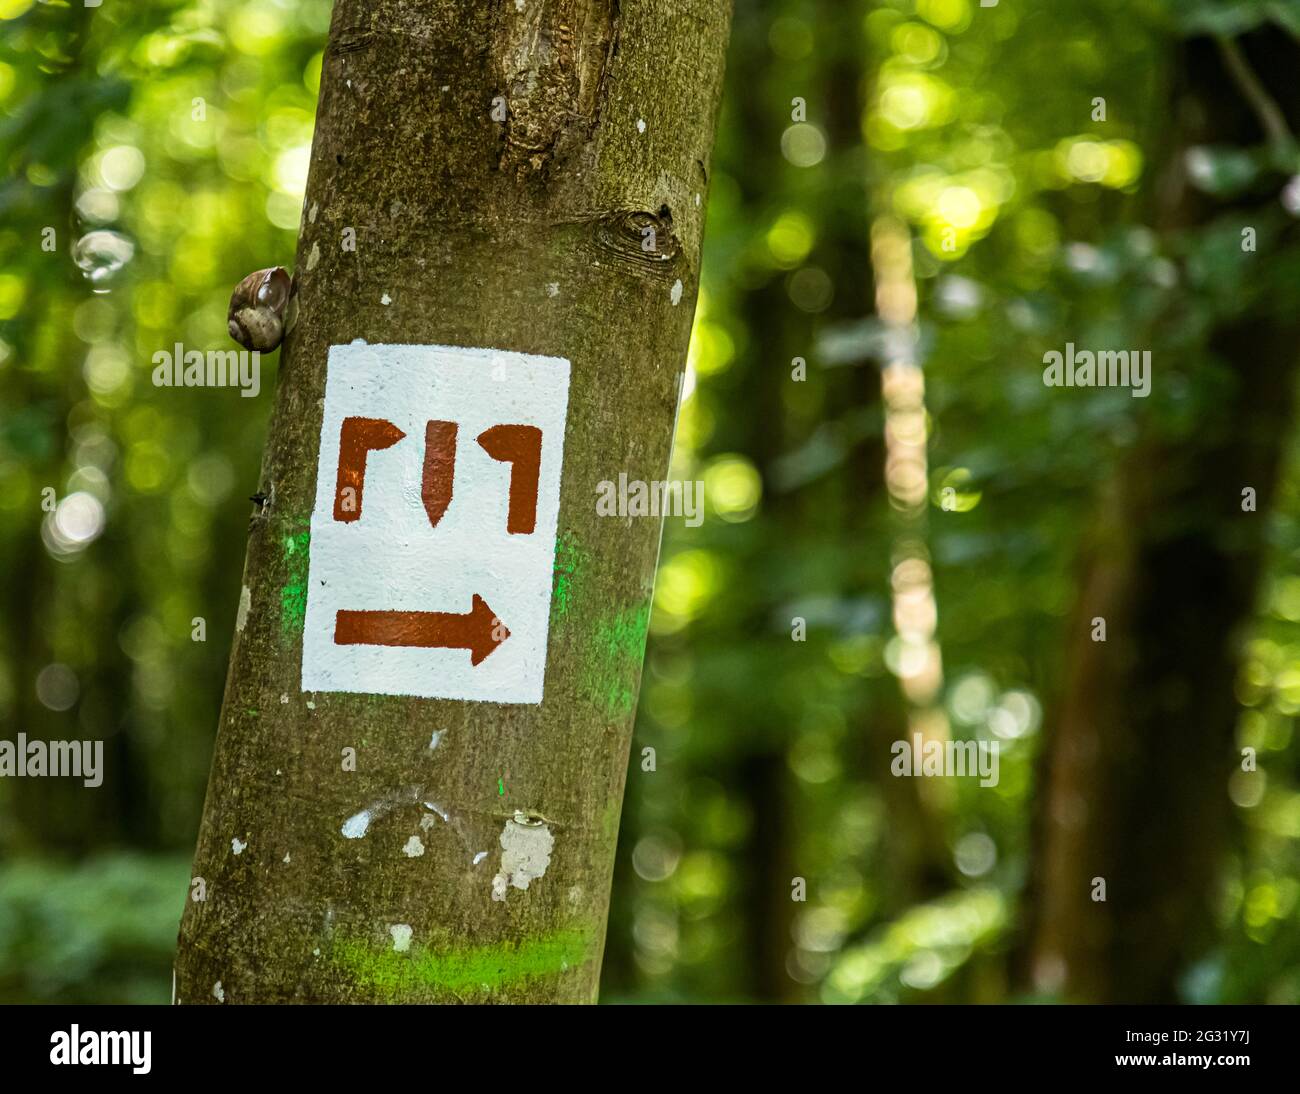 Snail shell and a strange hiking sign on a tree trunk near Esch-sur-Alzette, Luxembourg Stock Photo